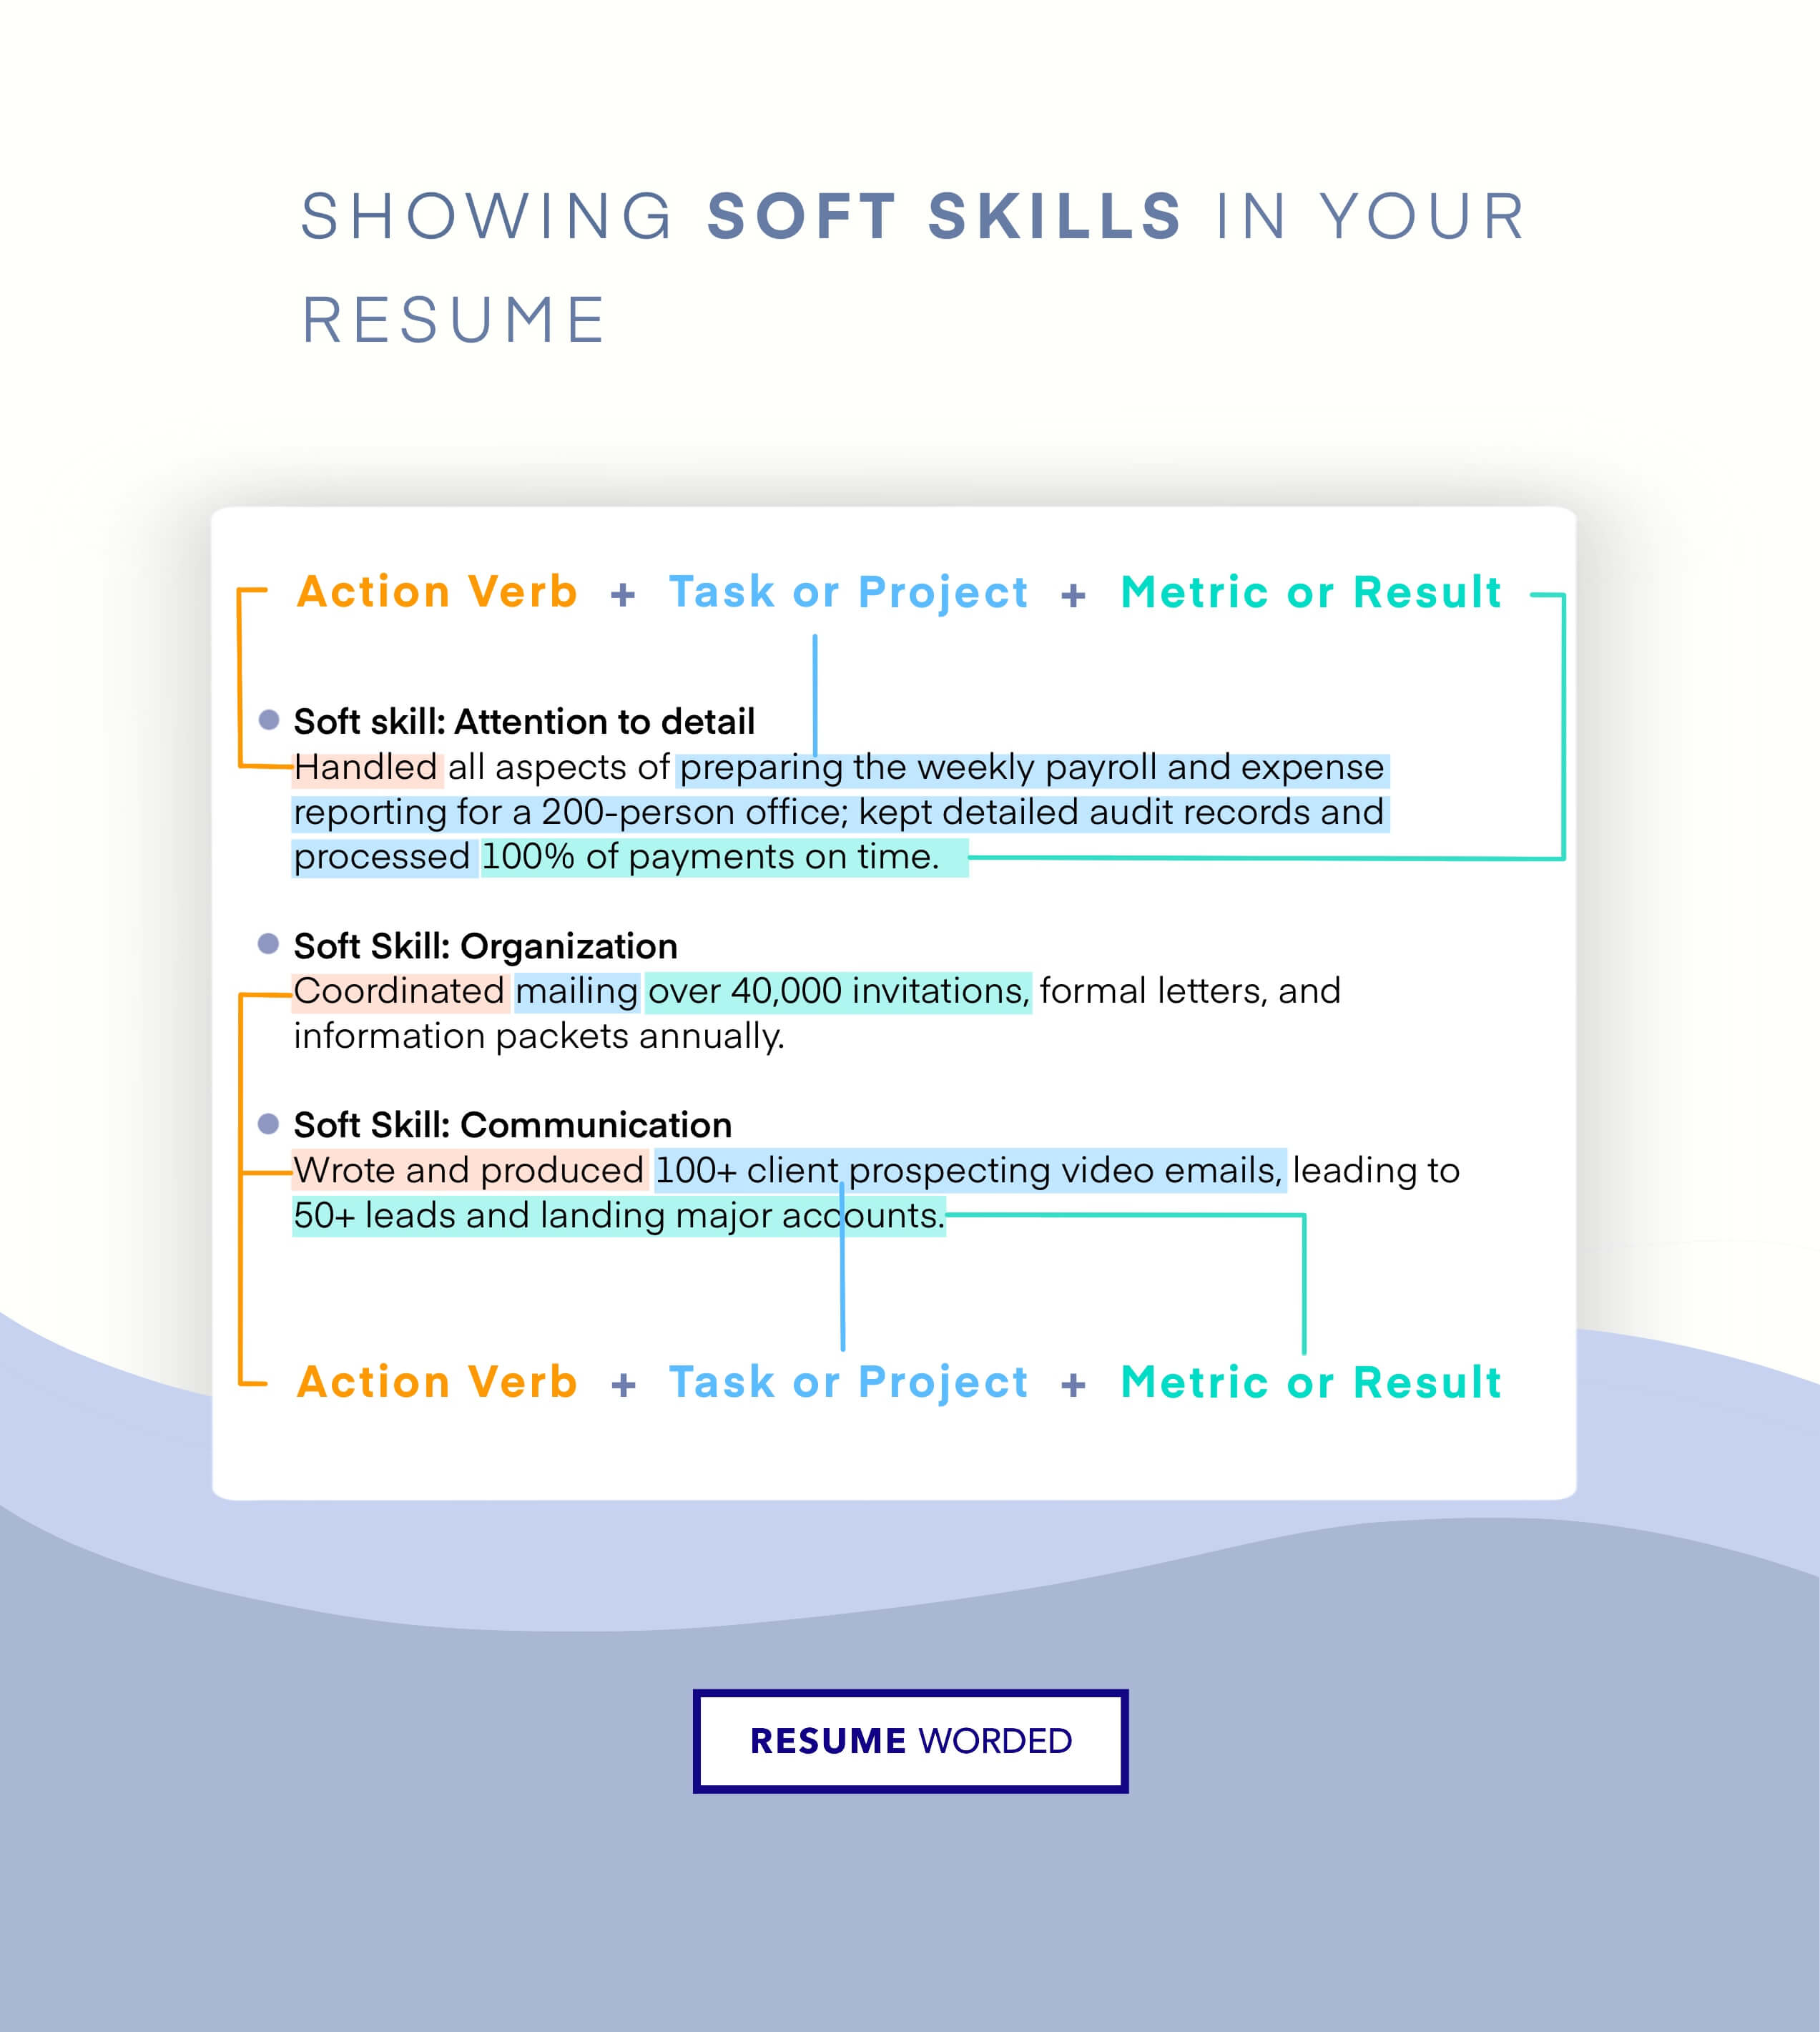 Emphasise your soft skills - Agile Project Manager CV